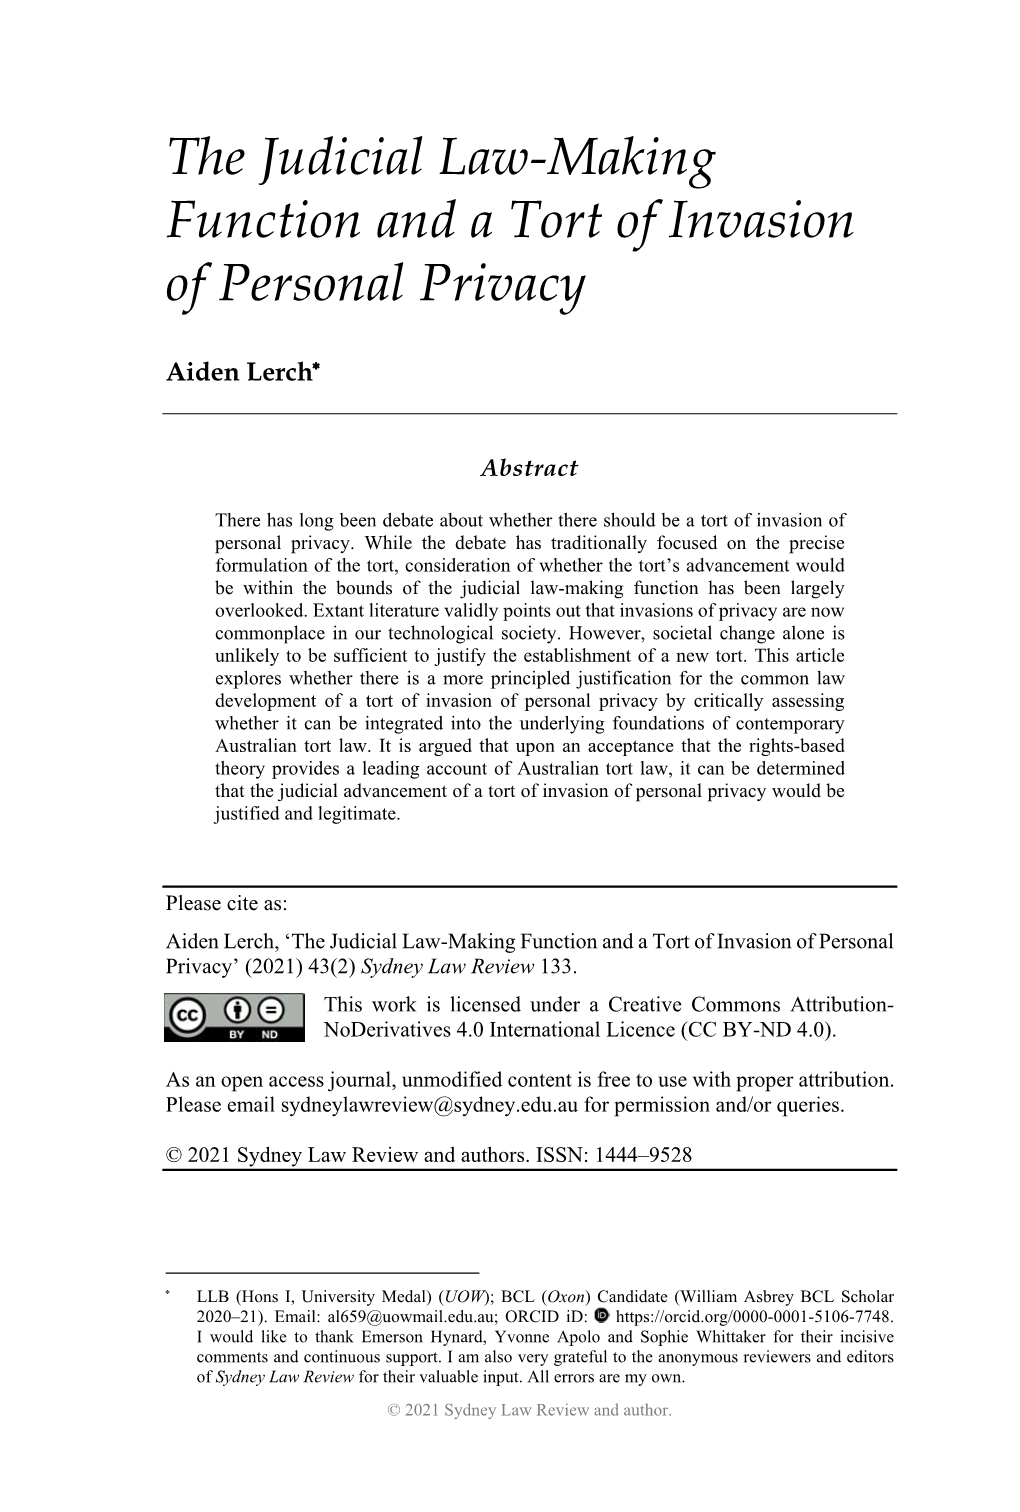 The Judicial Law-Making Function and a Tort of Invasion of Personal Privacy